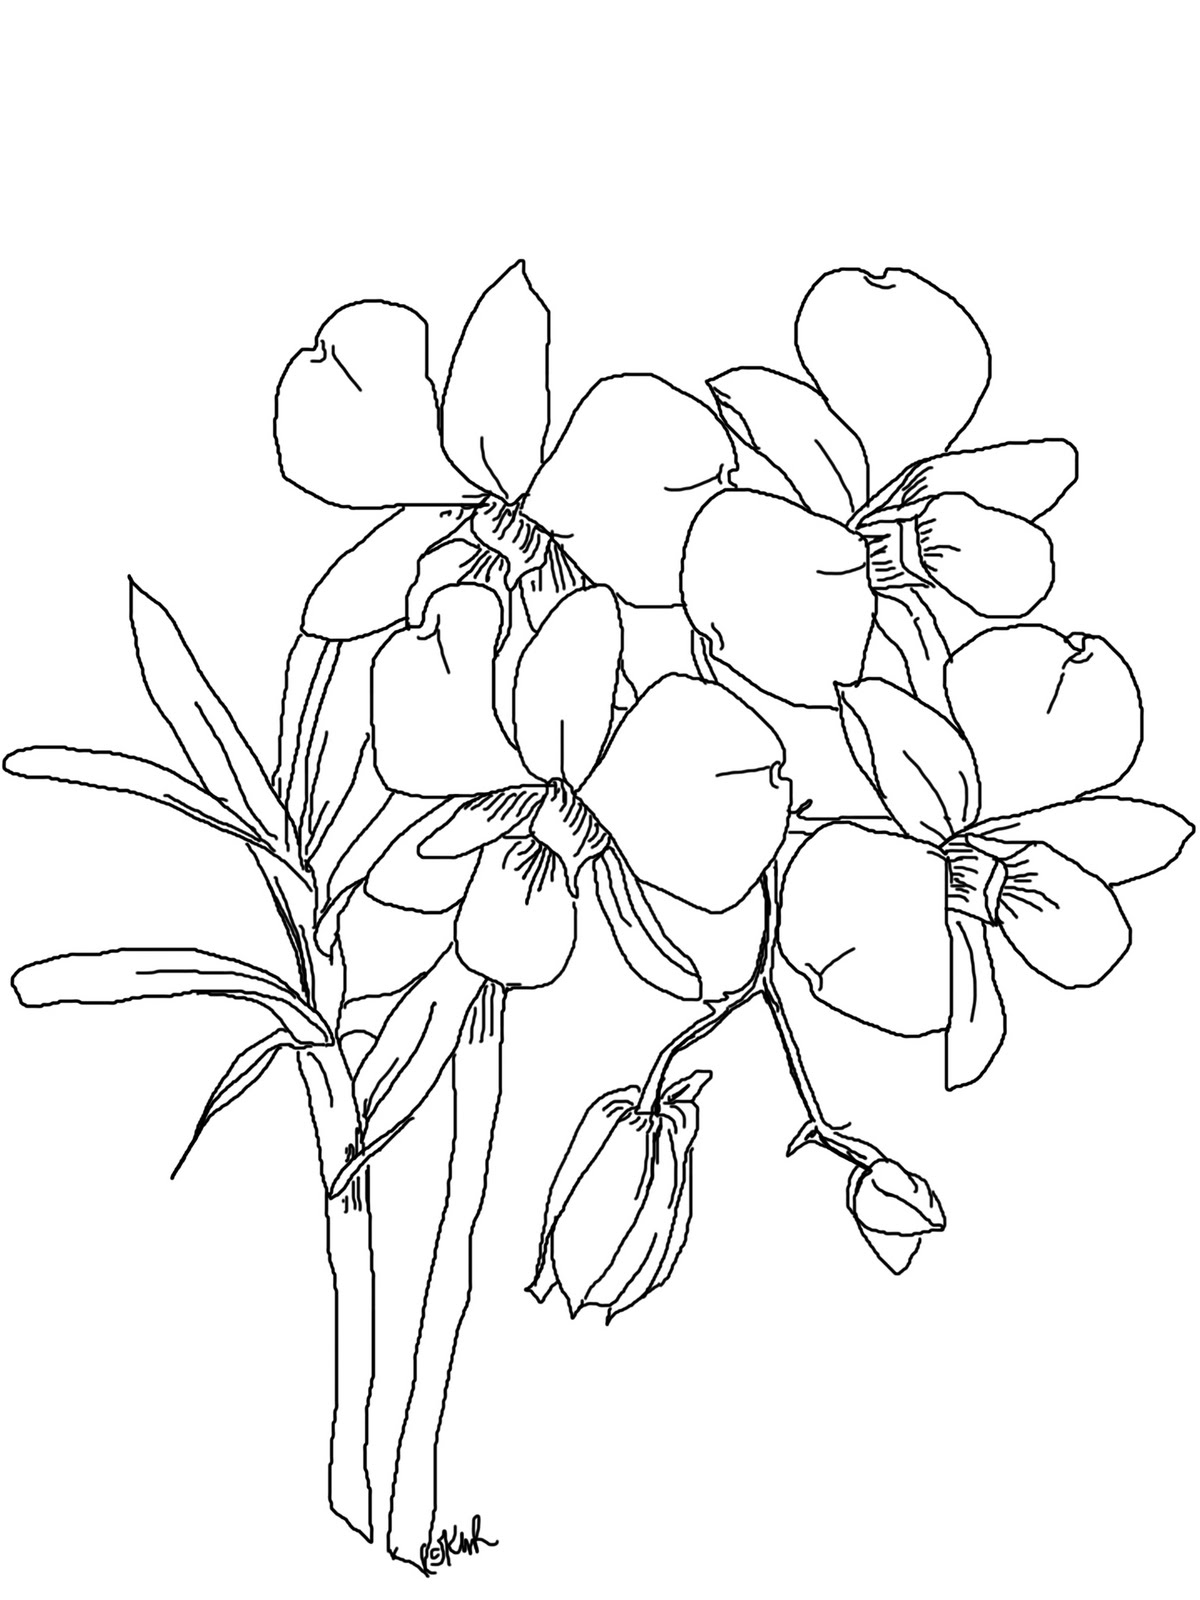 Download The Kitchen Table Crafter: Free Digi Sketch: Phalaenopsis ...